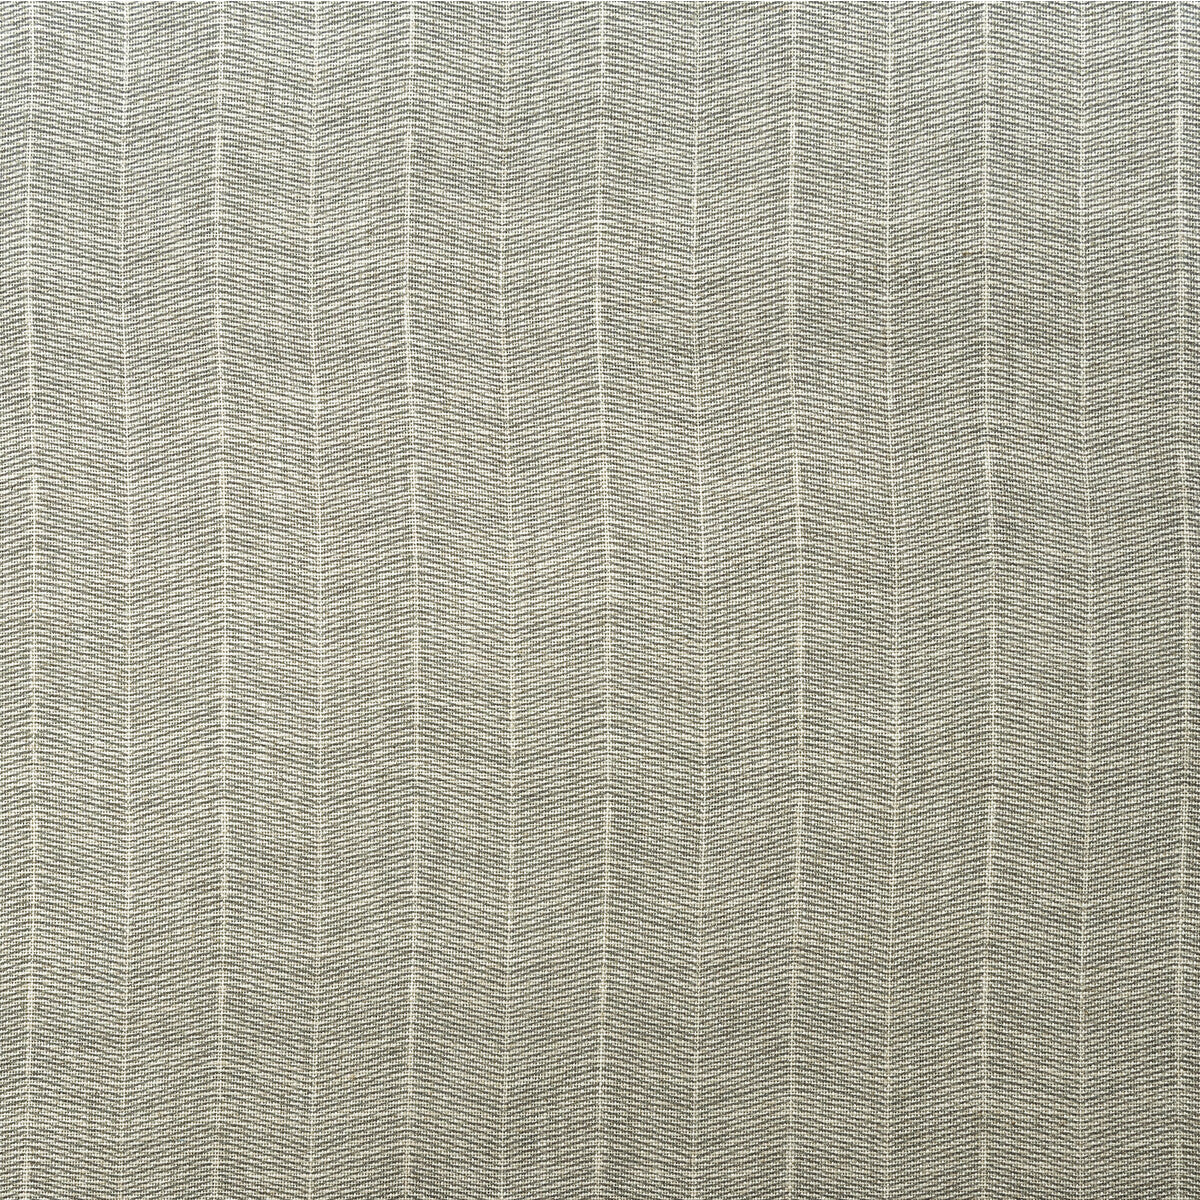 Furrow fabric in cloud color - pattern AM100380.11.0 - by Kravet Couture in the Andrew Martin Garden Path collection